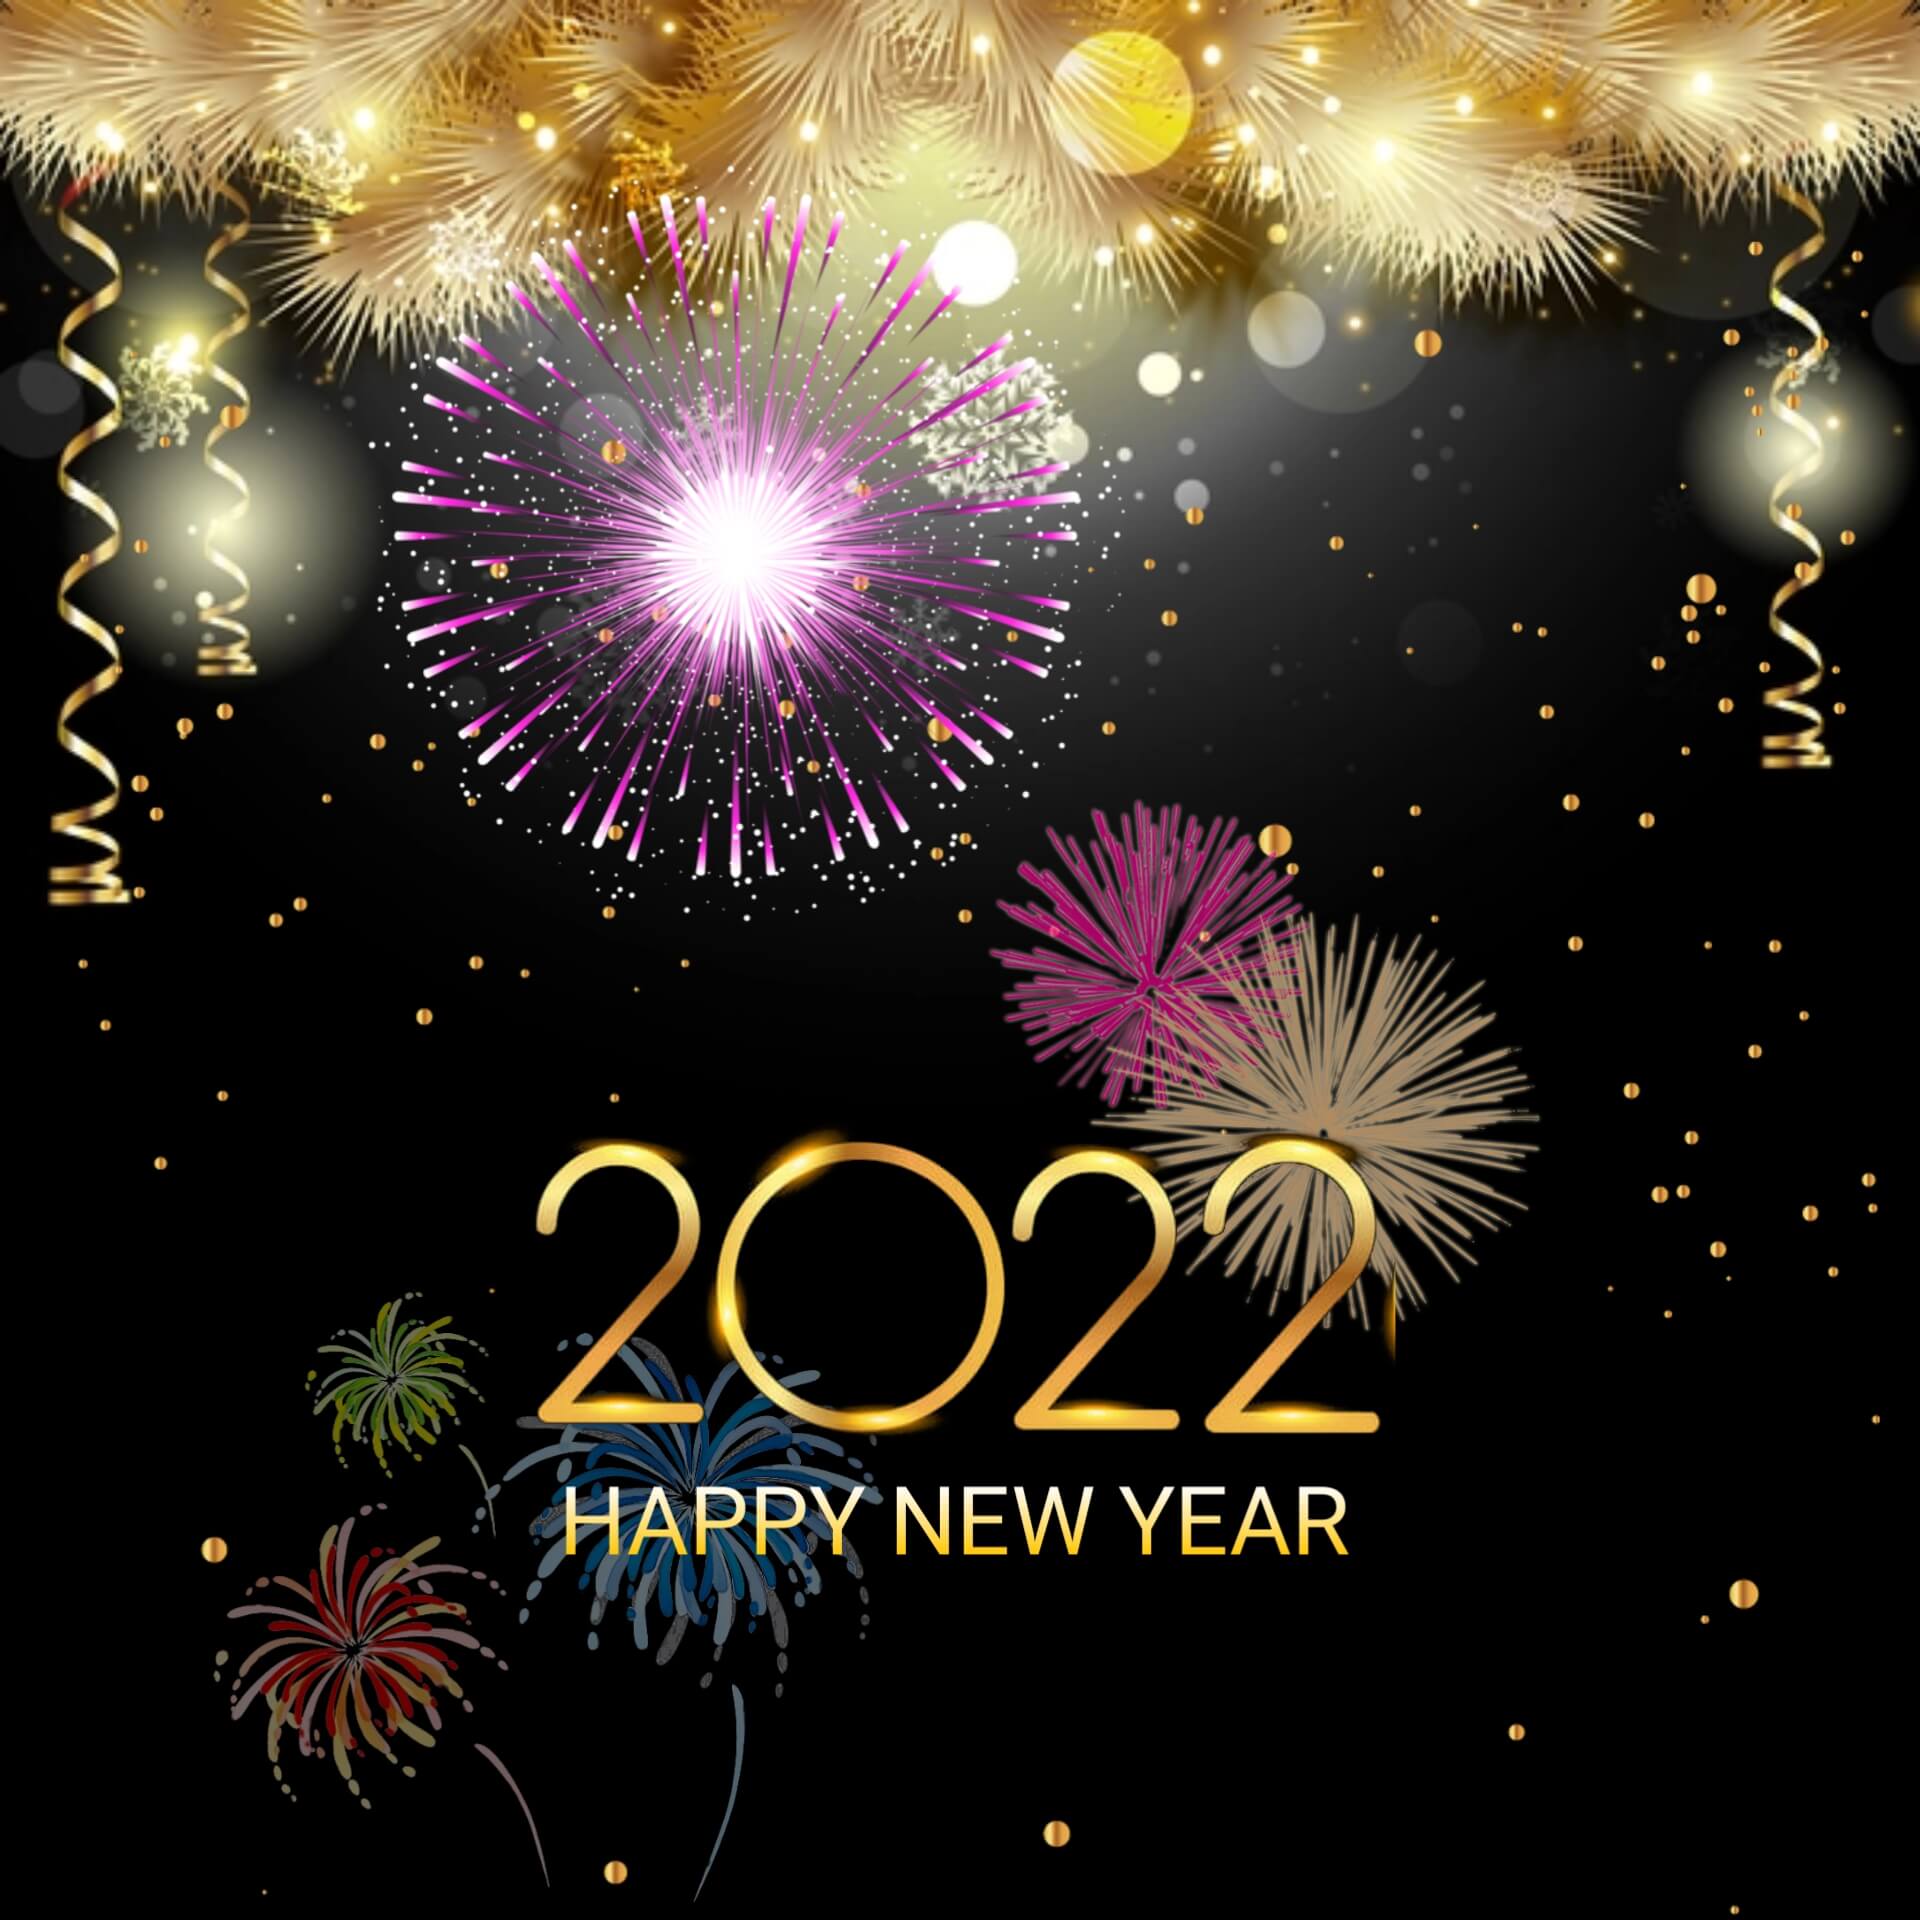 Firweworks Happy New Year Images